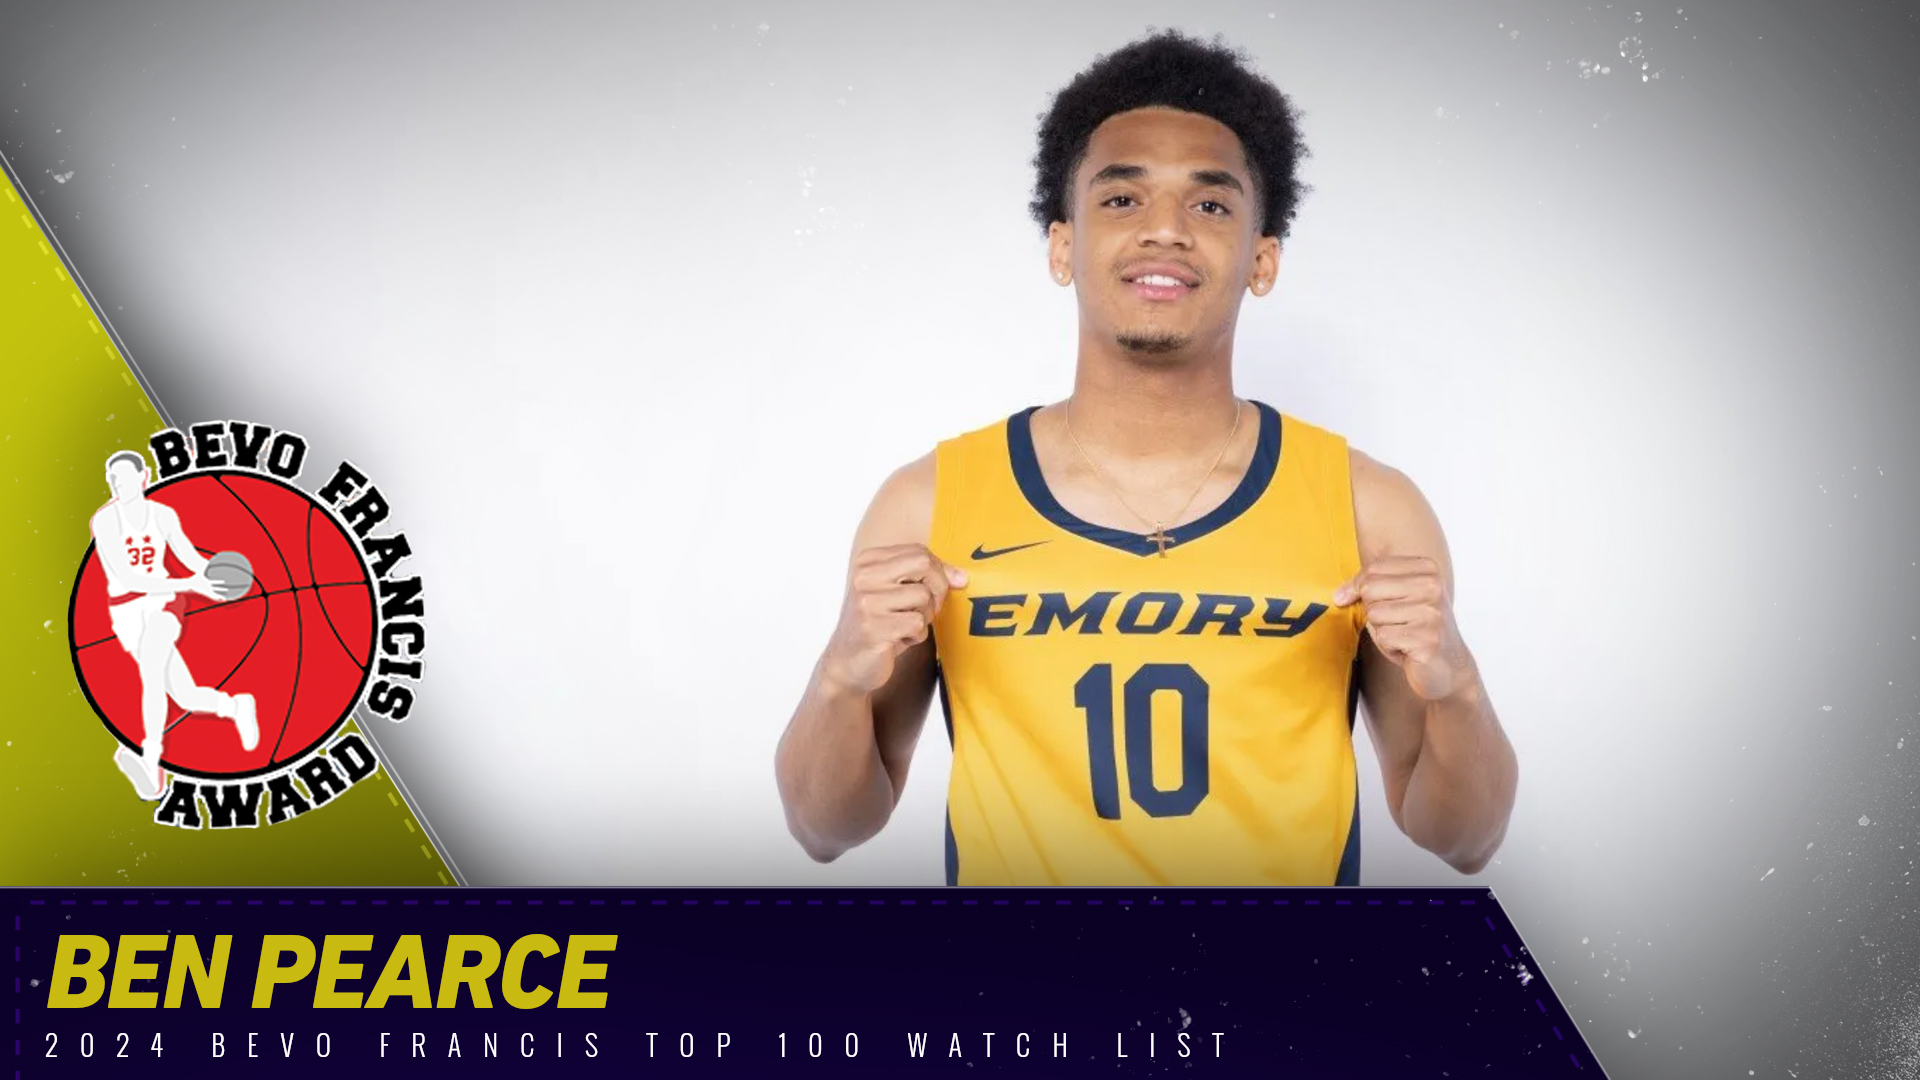 Ben Pearce Named to Bevo Francis Award Top 100 Watch List